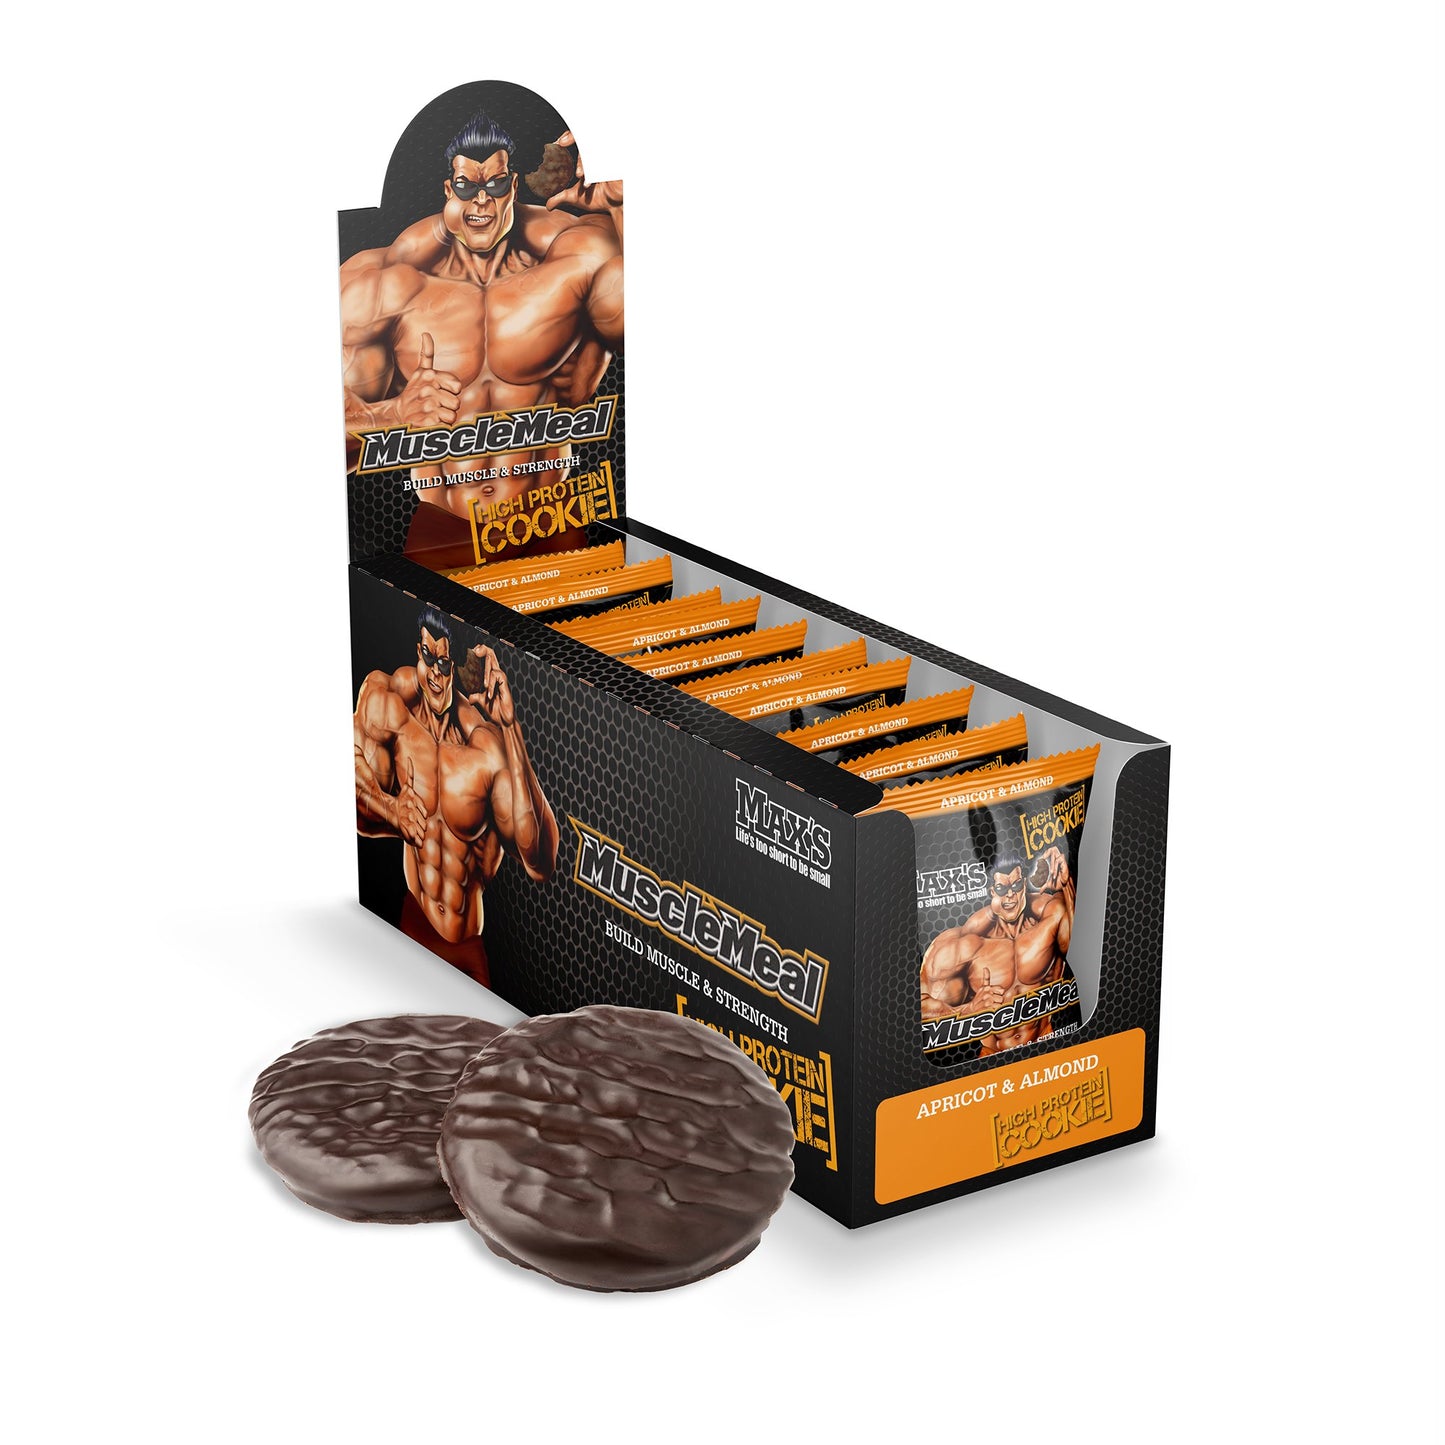 Maxs Muscle Meal Cookies